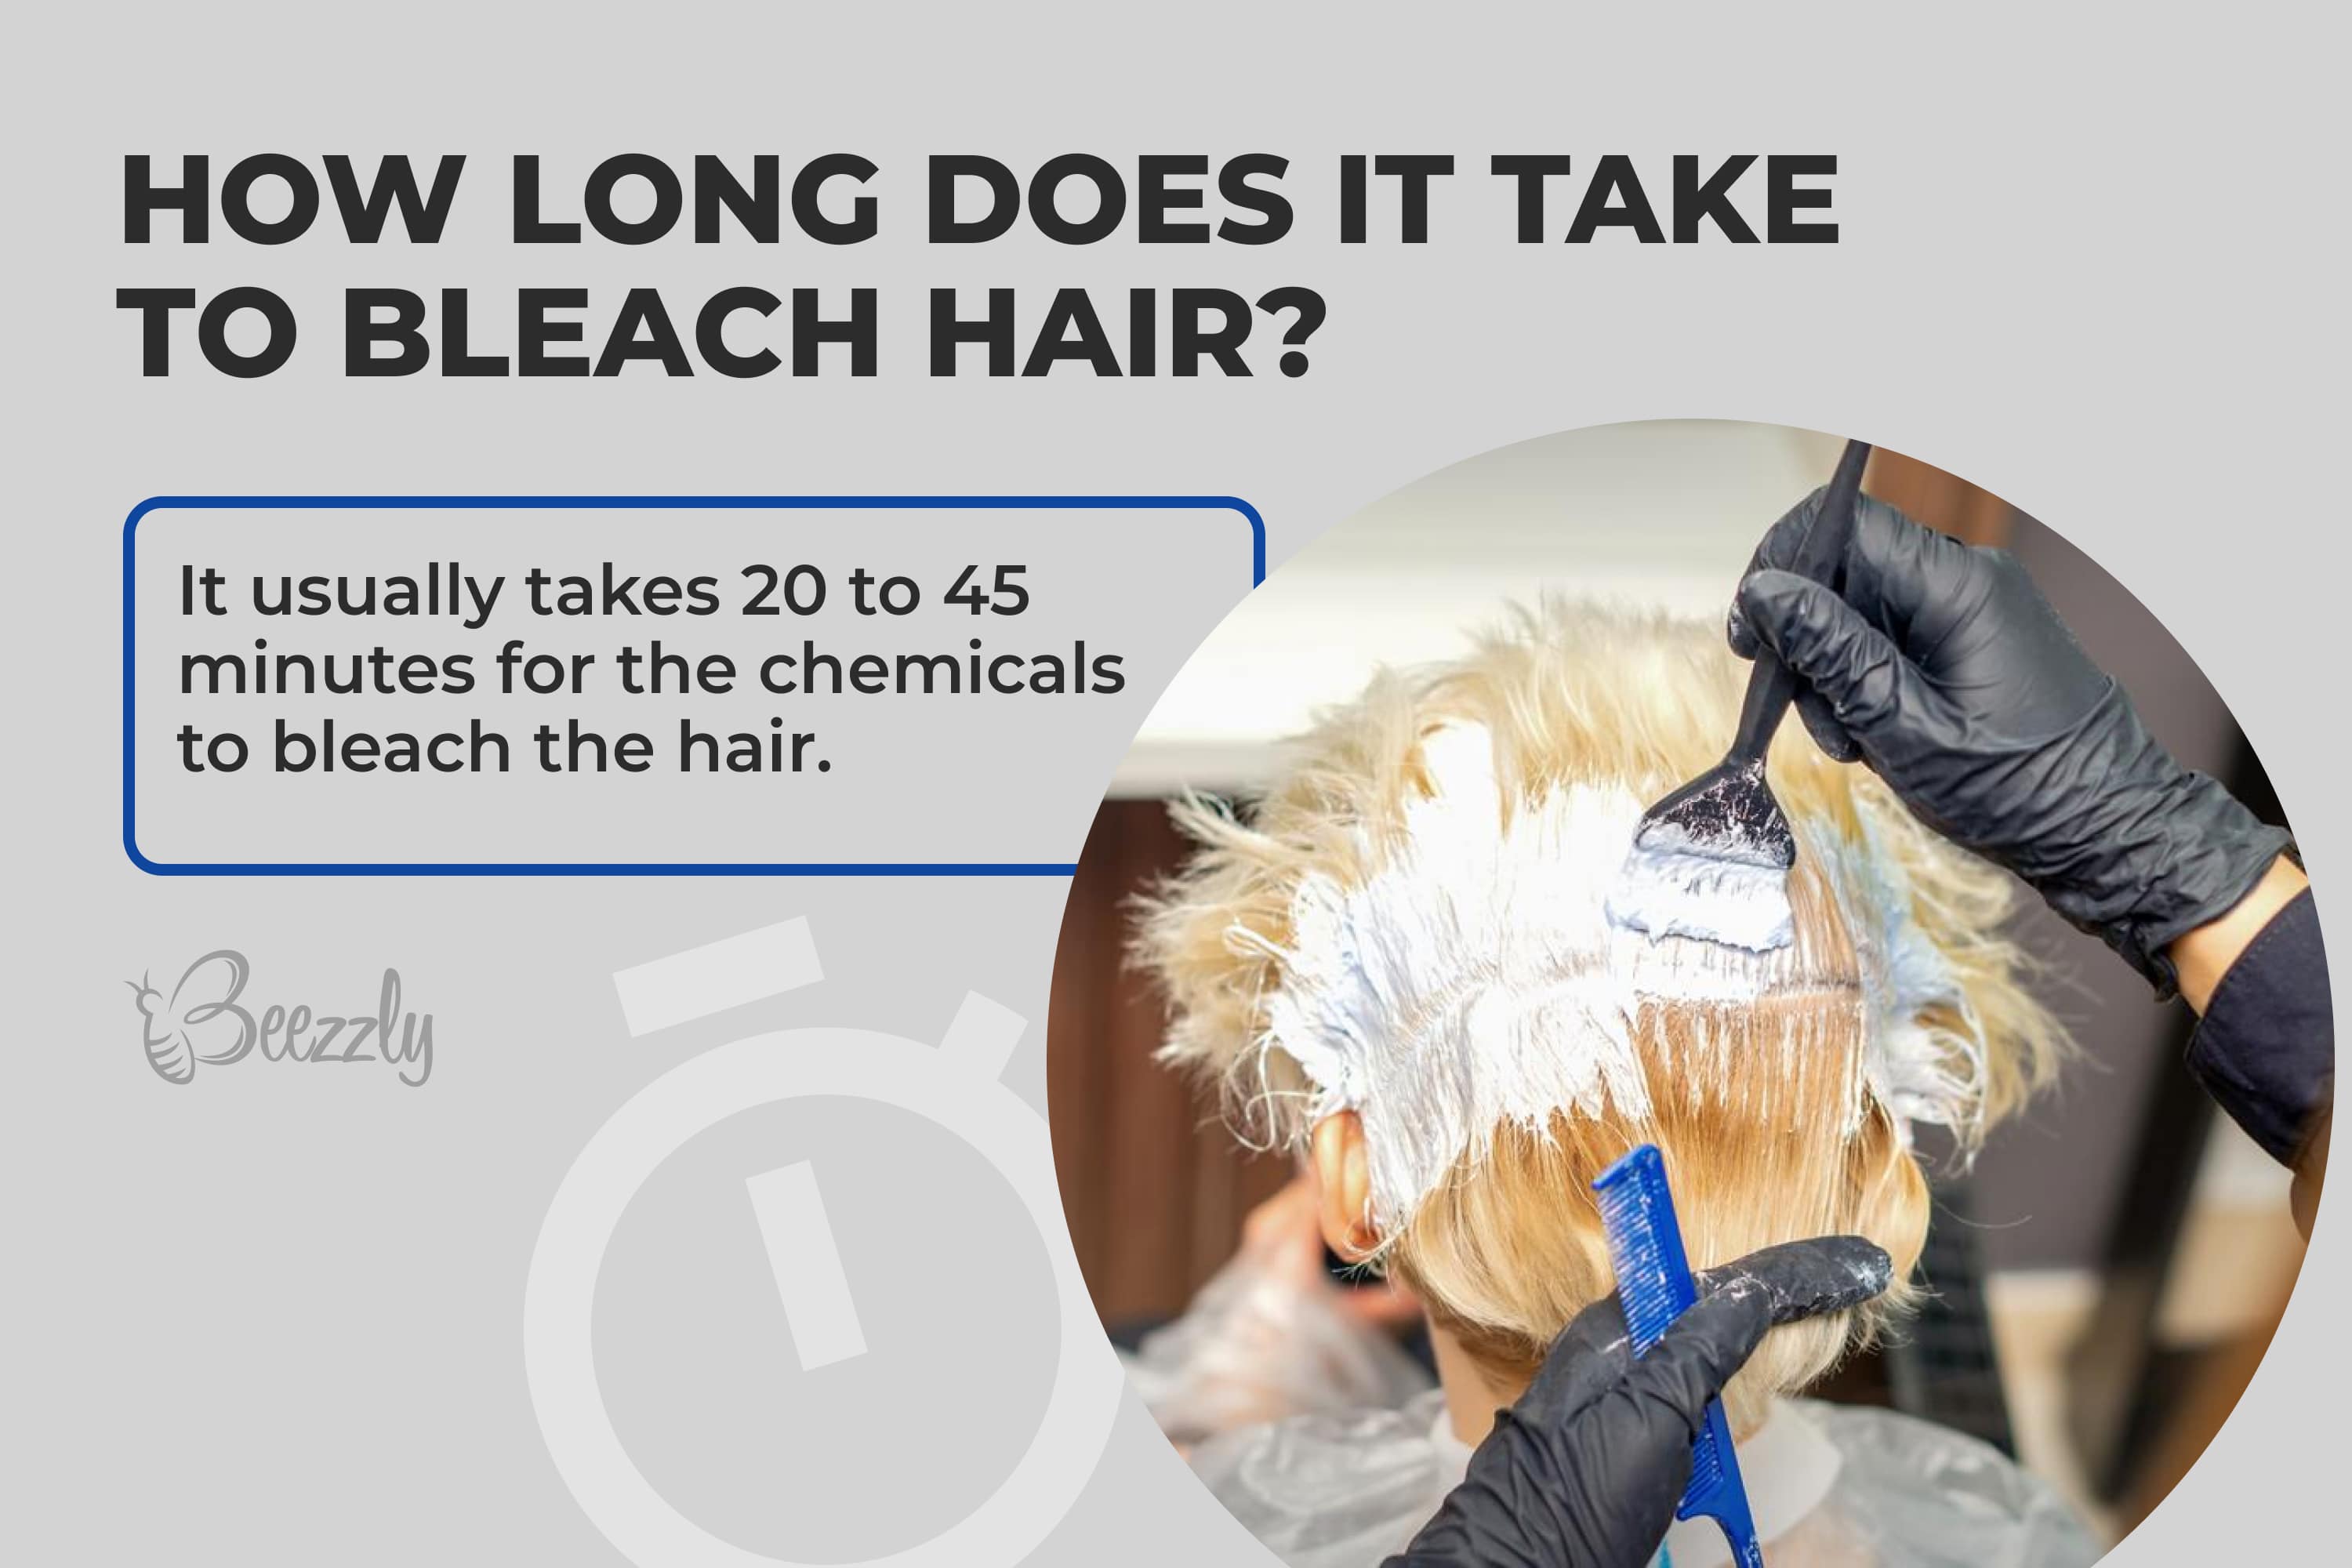 How long does it take to bleach hair